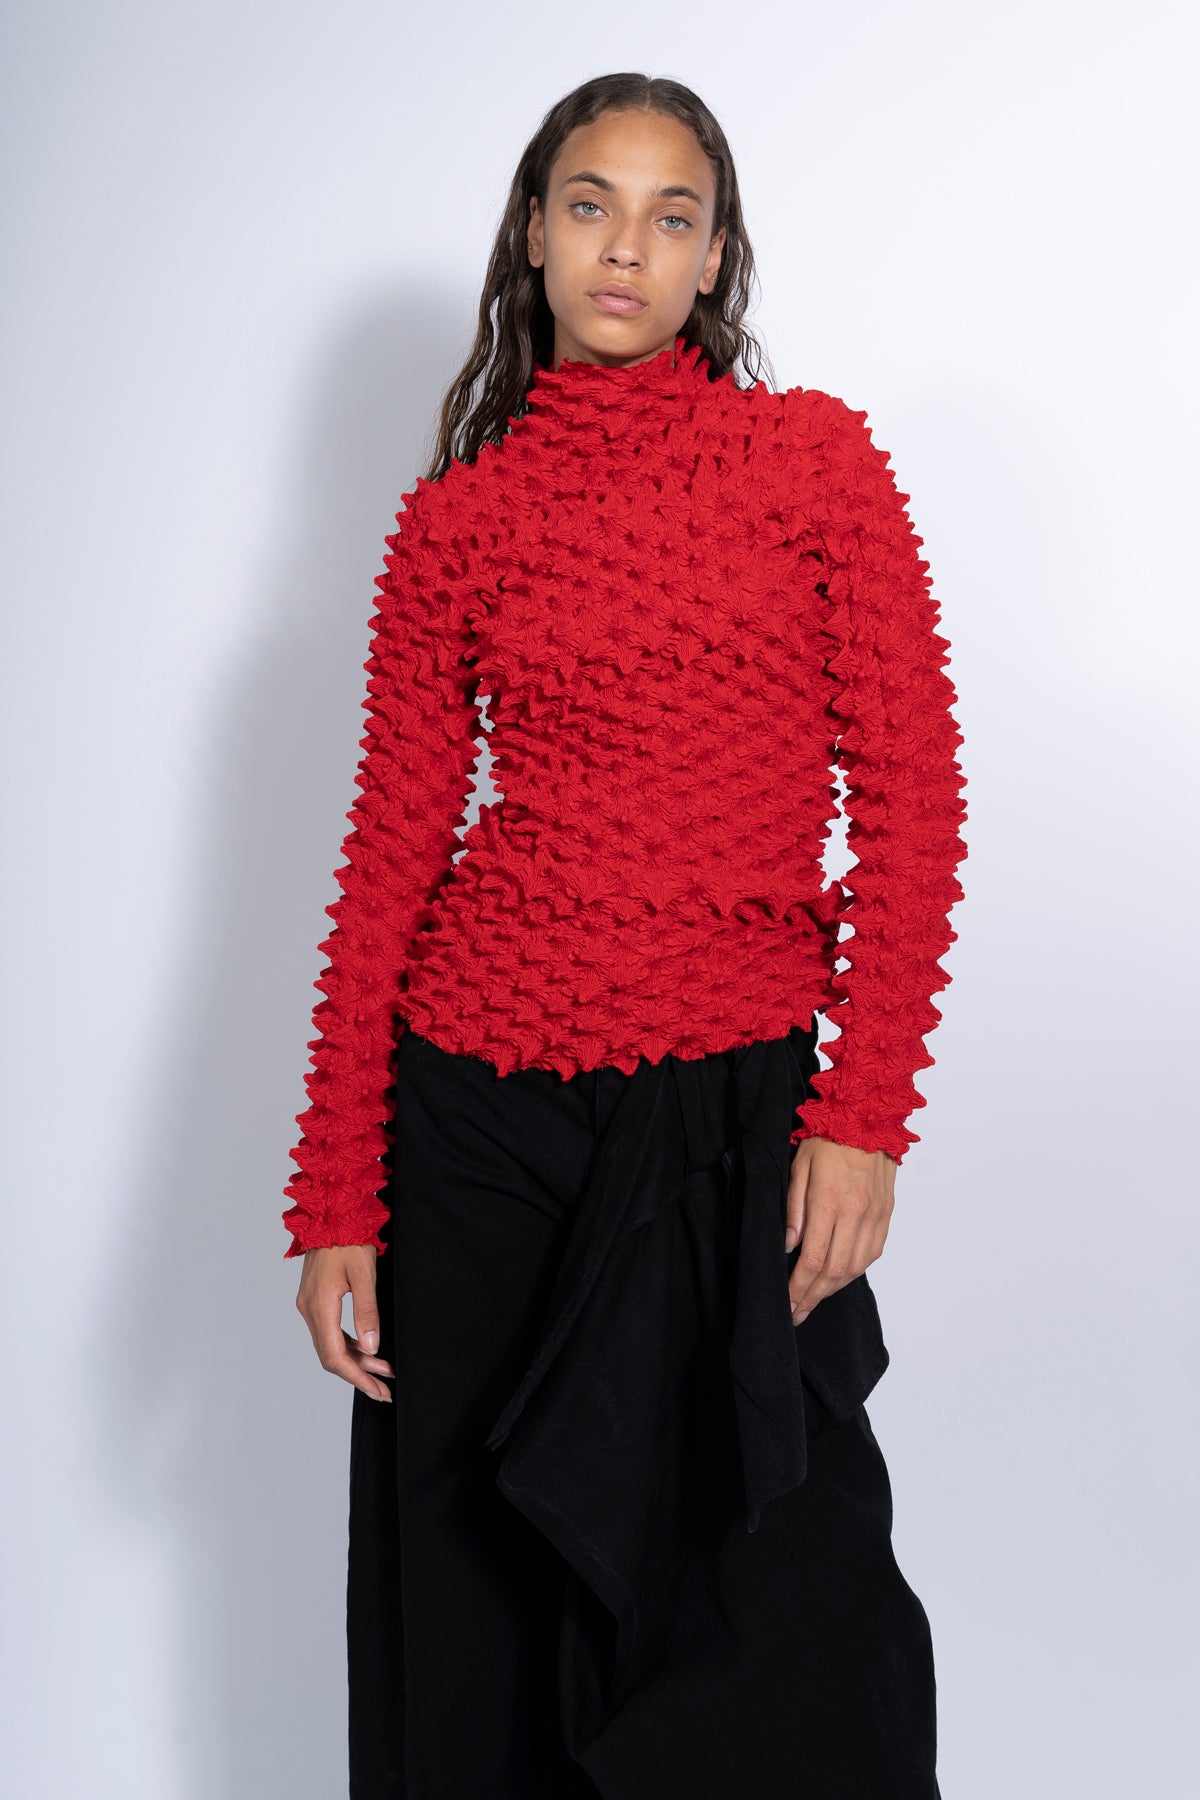 RED SPIKE TOP marques almeida